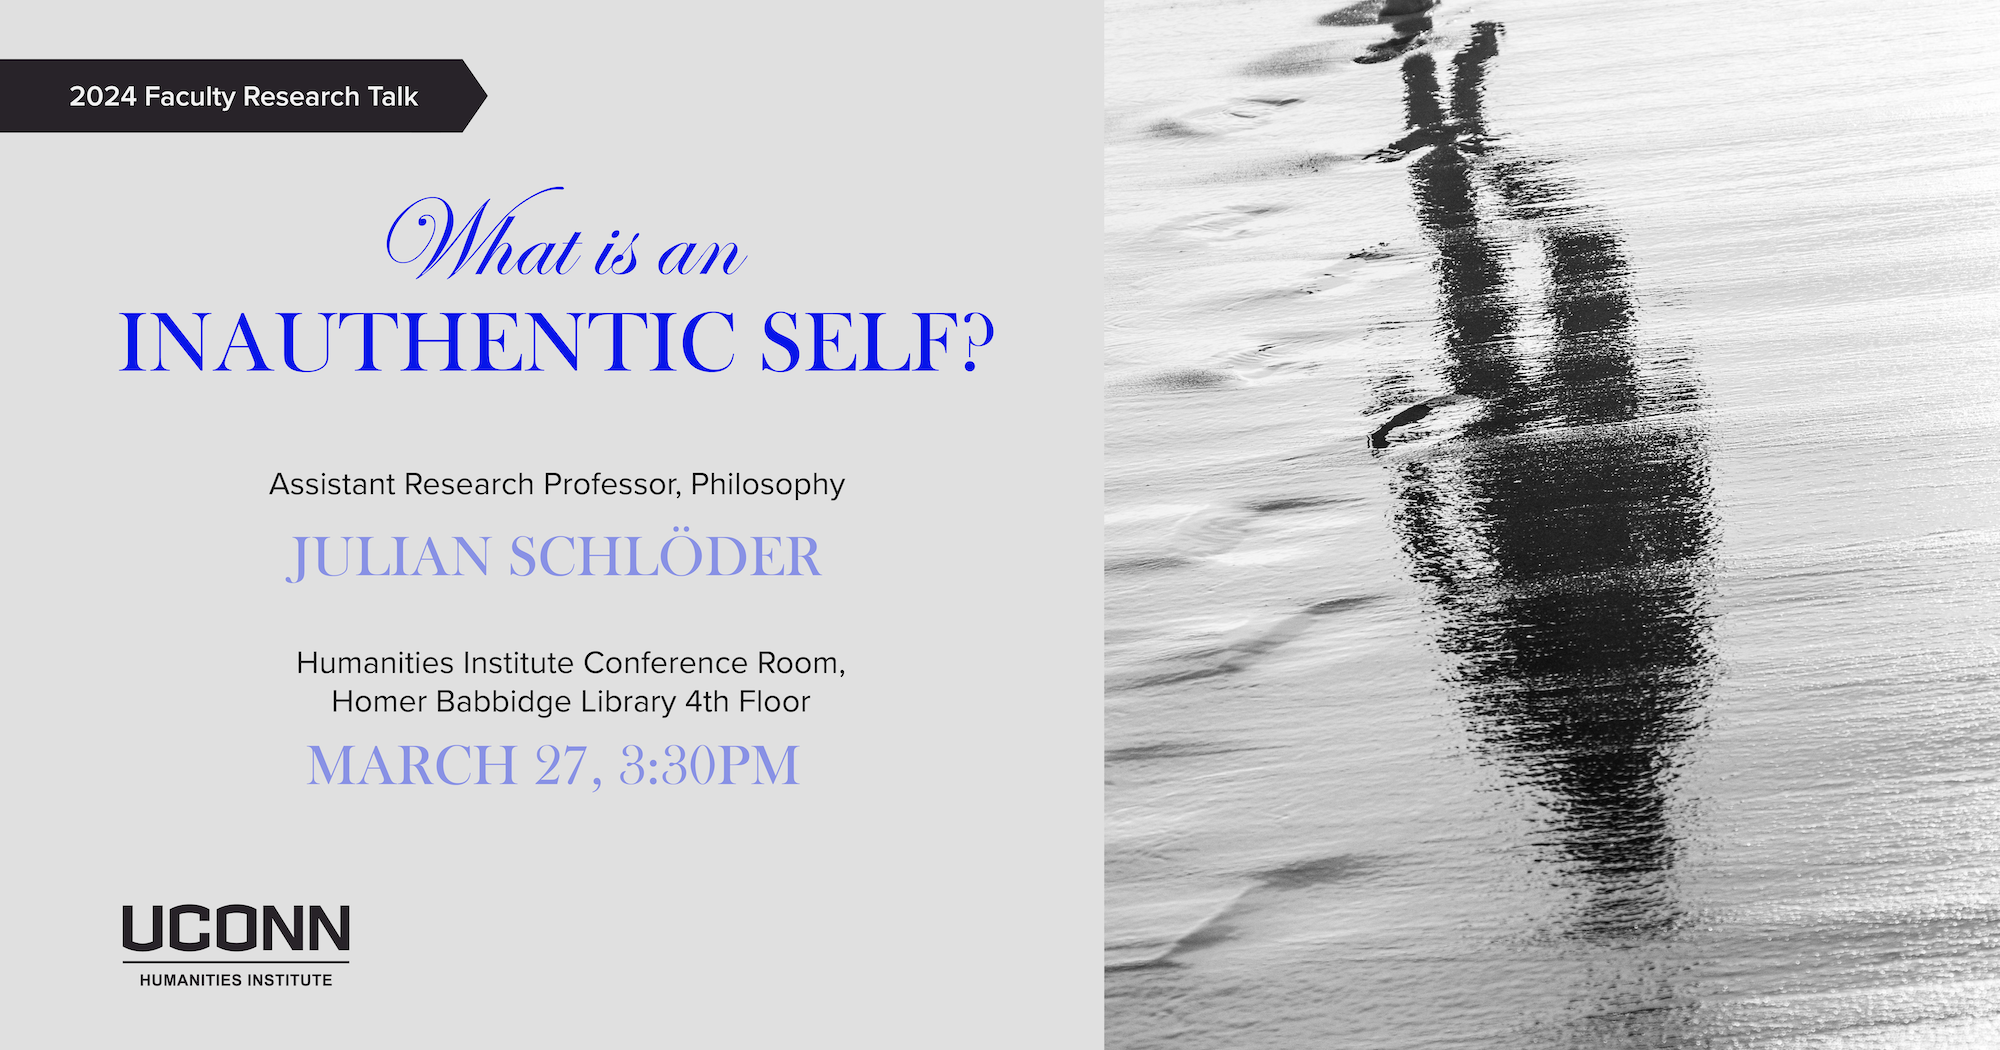 2024 Faculty Talk. "What is an inauthentic self?" Assistant Research Professor, Philosophy, Julian Schlöder. March 27, 3:30pm, Humanities Institute Conference Room, Fourth floor